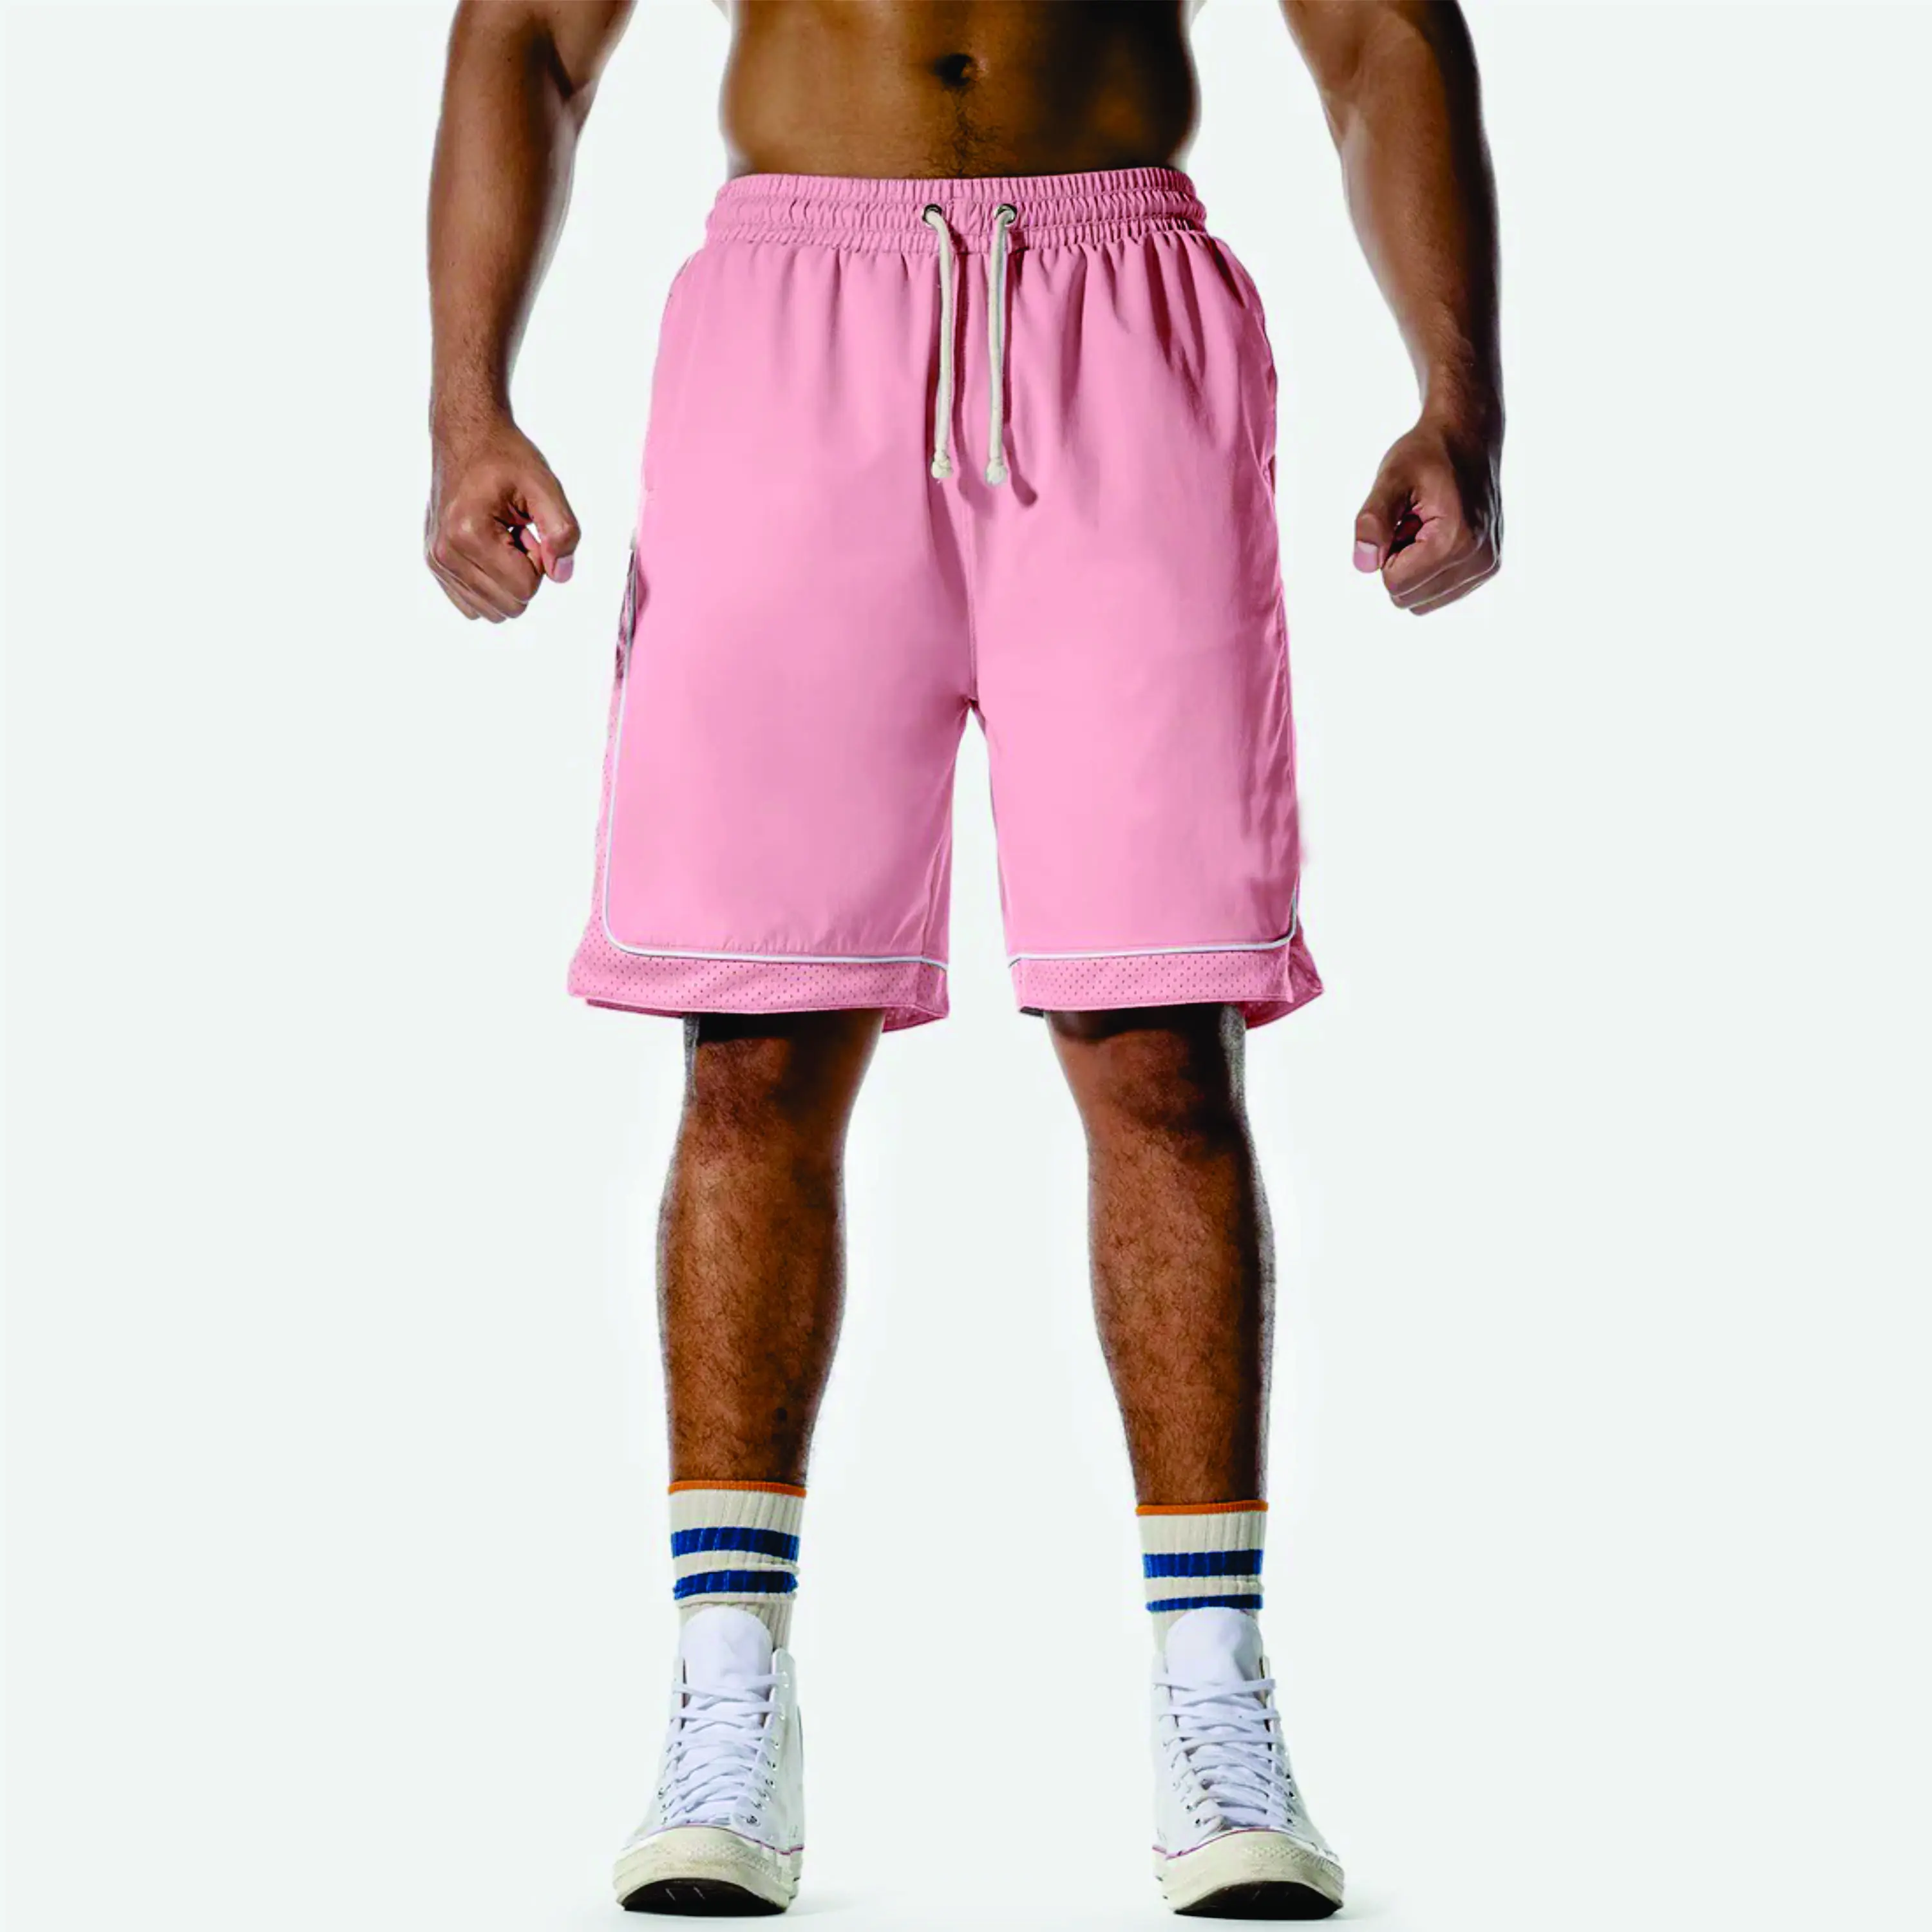 Stretch Nylon Micro Ripstop Flamingo Pink Marl Golden Era Basketball Shorts with Contrast Piping and Comfort Waistband